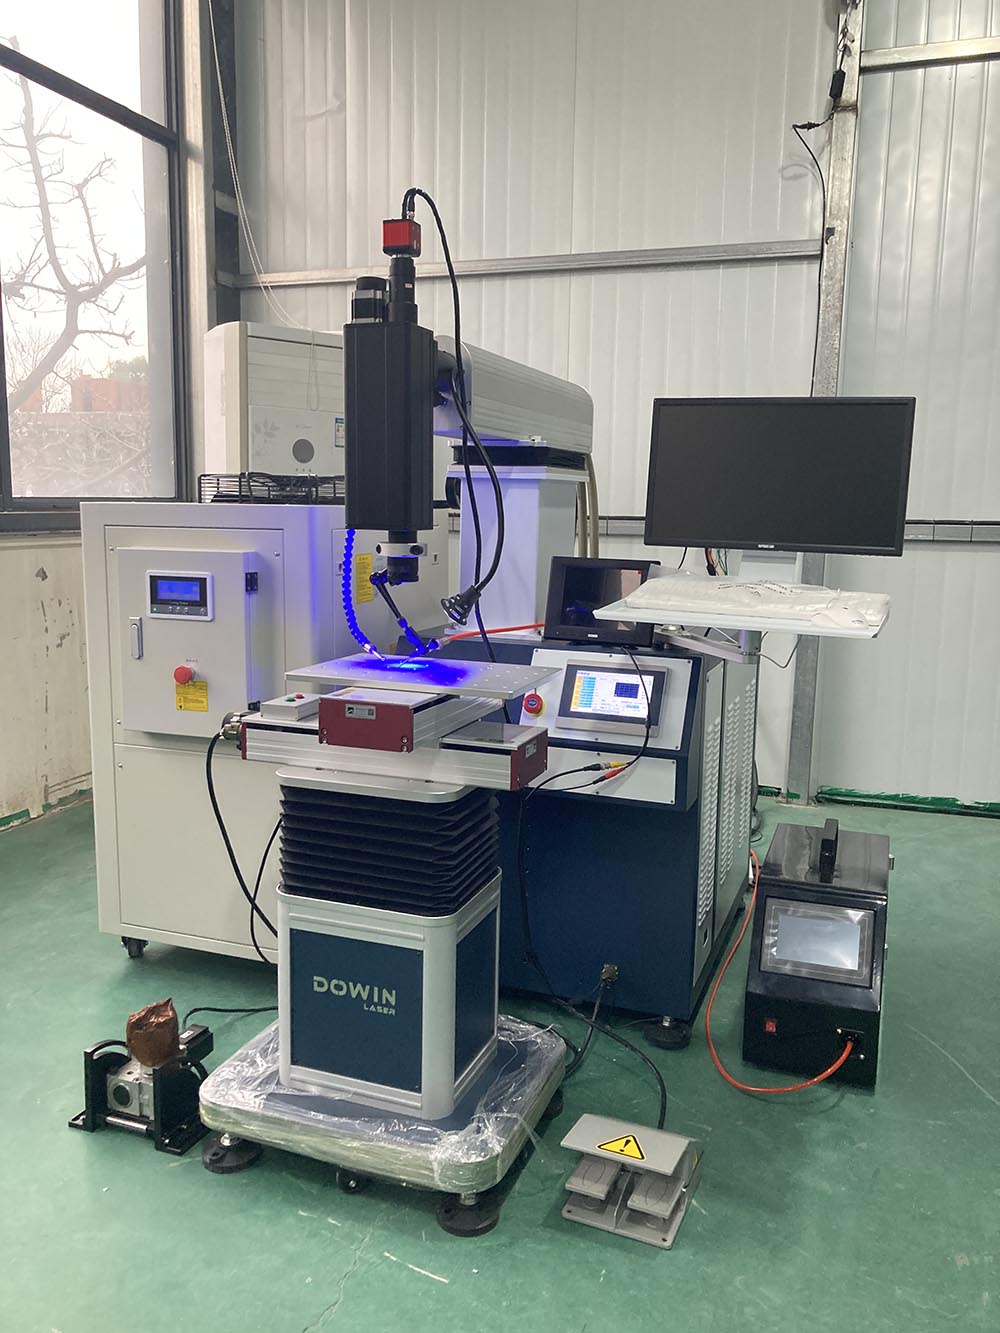 CNC 2000 Automatic YAG Laser Welding Machine for Metal Aluminum Alloy Three Way Pipe Welding.